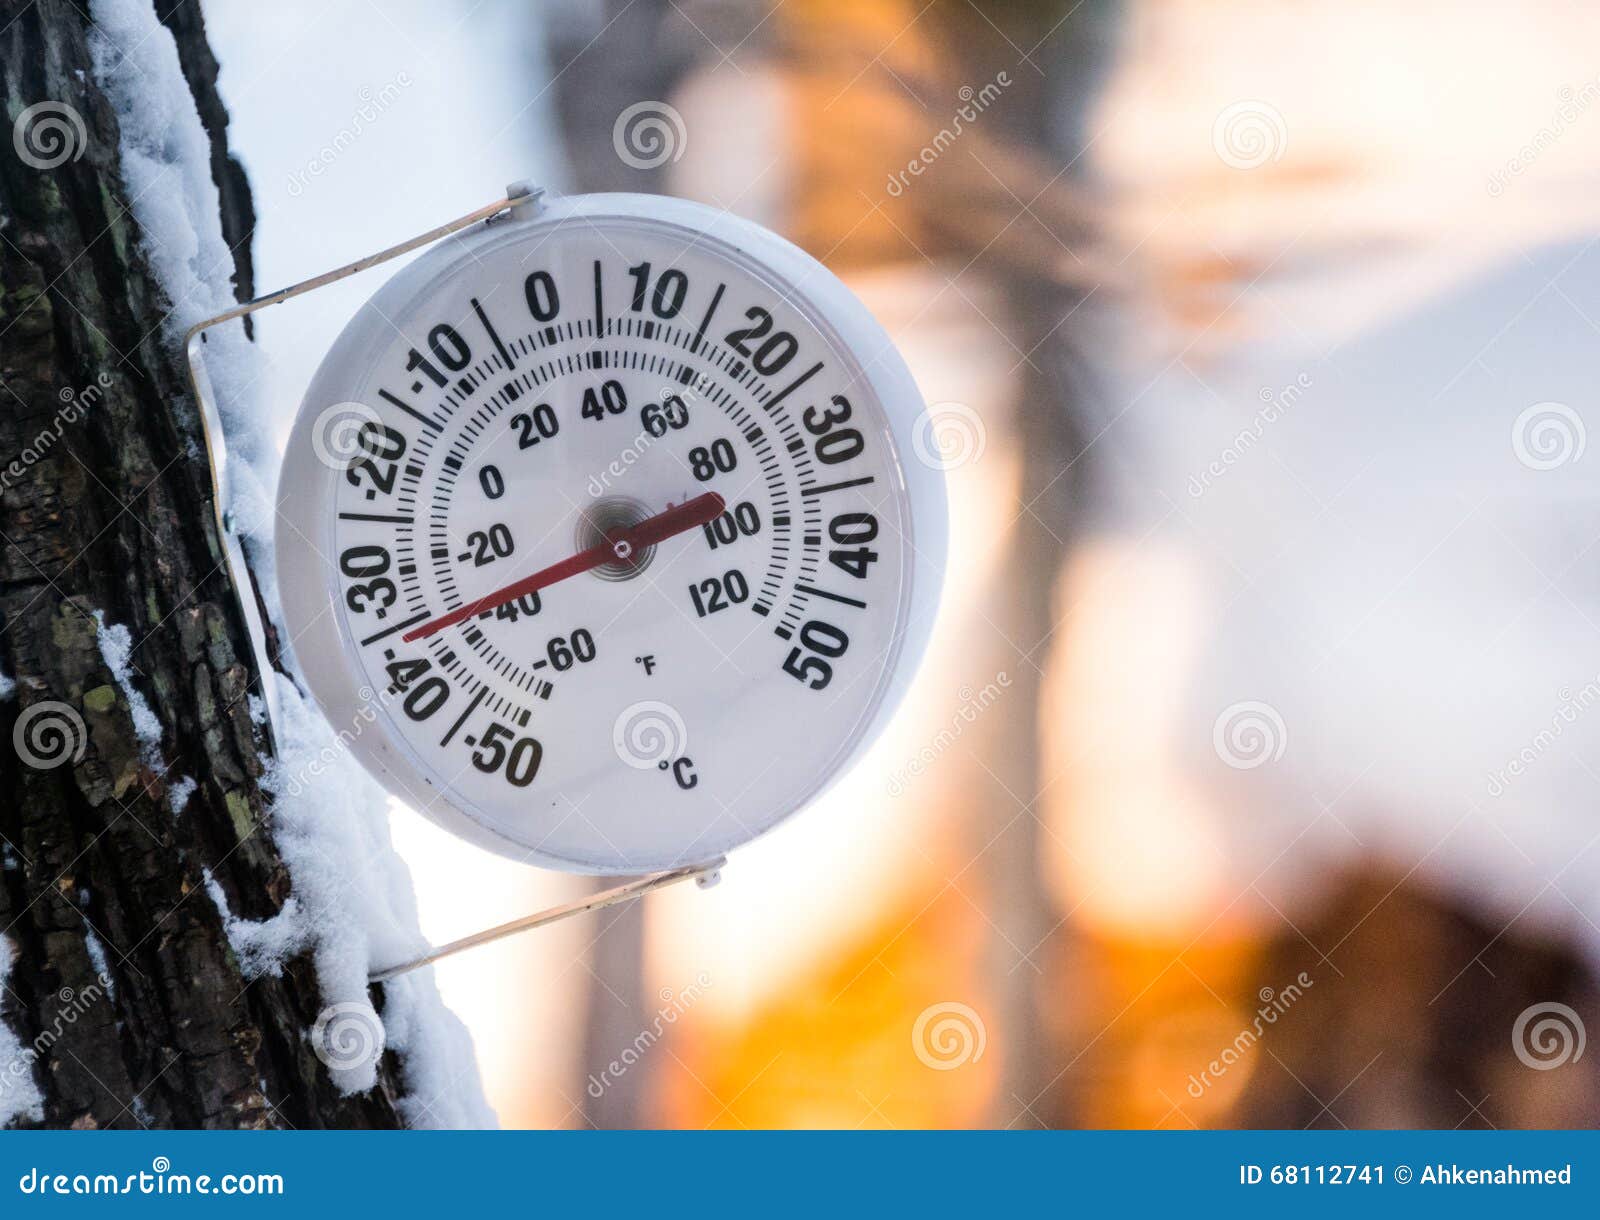 https://thumbs.dreamstime.com/z/s-too-cold-outside-analogue-thermometer-outside-displays-temp-minus-degrees-celsius-round-mounted-tree-shows-68112741.jpg